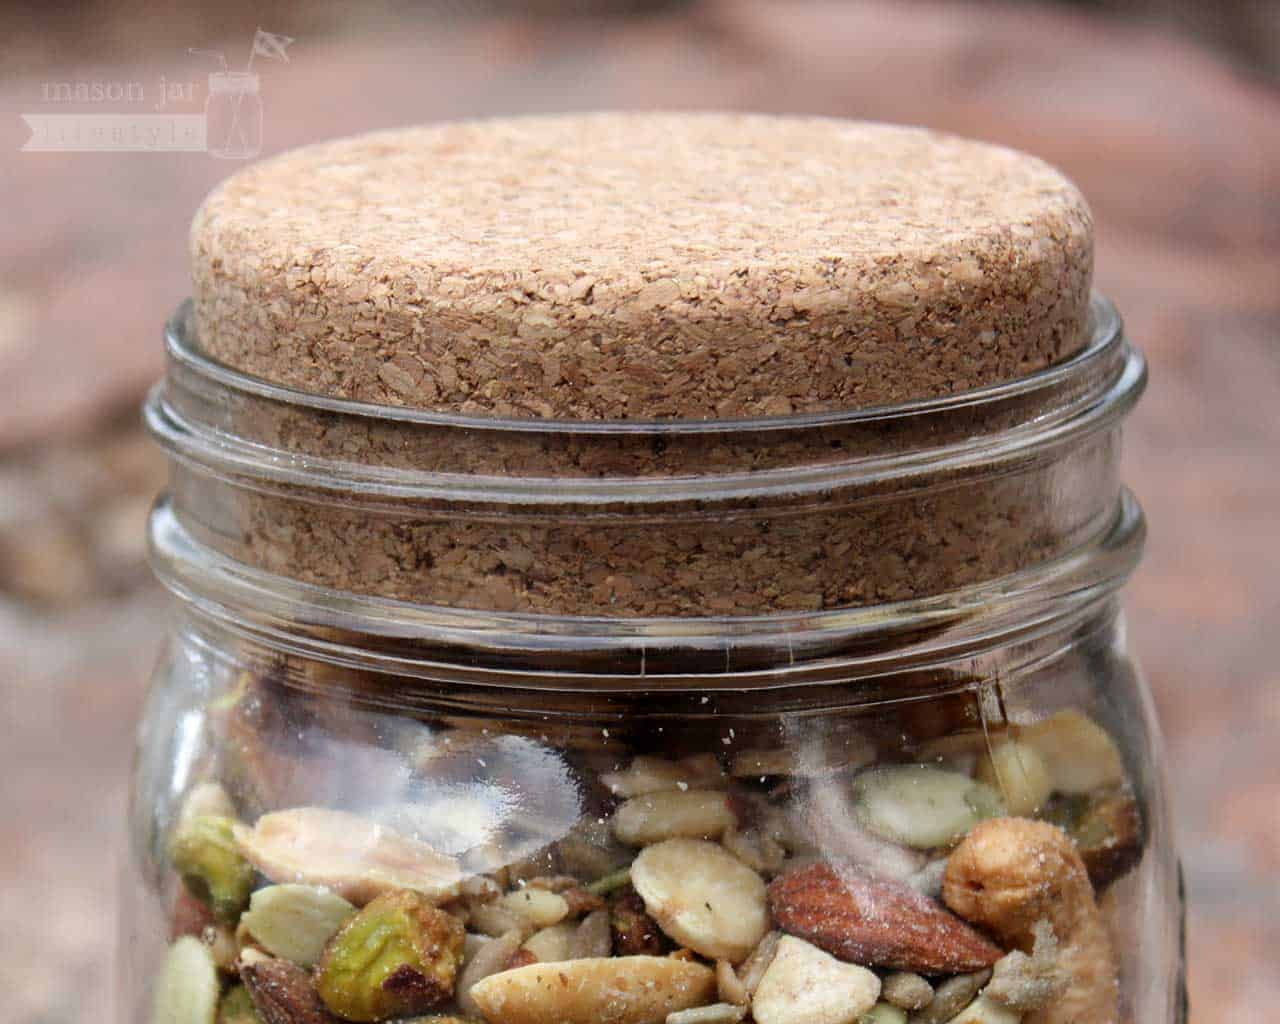 Cork lid stopper on wide mouth quart Kerr Mason jar with nuts